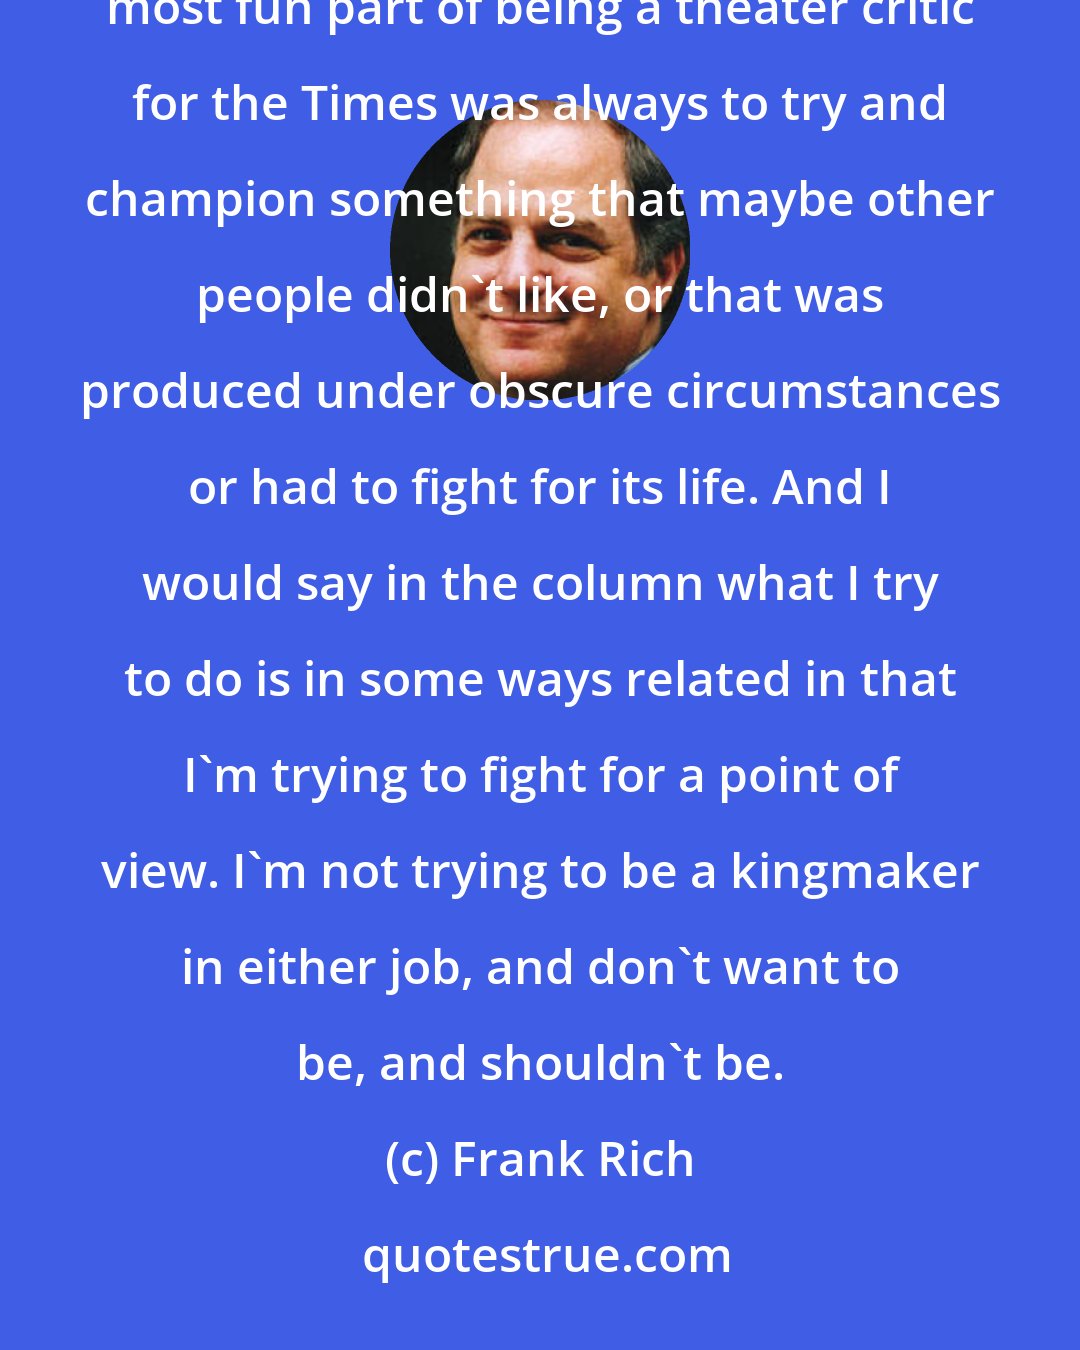 Frank Rich: To me, the fun part of both jobs is to always try to push the discussion and debate forward in some way. The most fun part of being a theater critic for the Times was always to try and champion something that maybe other people didn't like, or that was produced under obscure circumstances or had to fight for its life. And I would say in the column what I try to do is in some ways related in that I'm trying to fight for a point of view. I'm not trying to be a kingmaker in either job, and don't want to be, and shouldn't be.